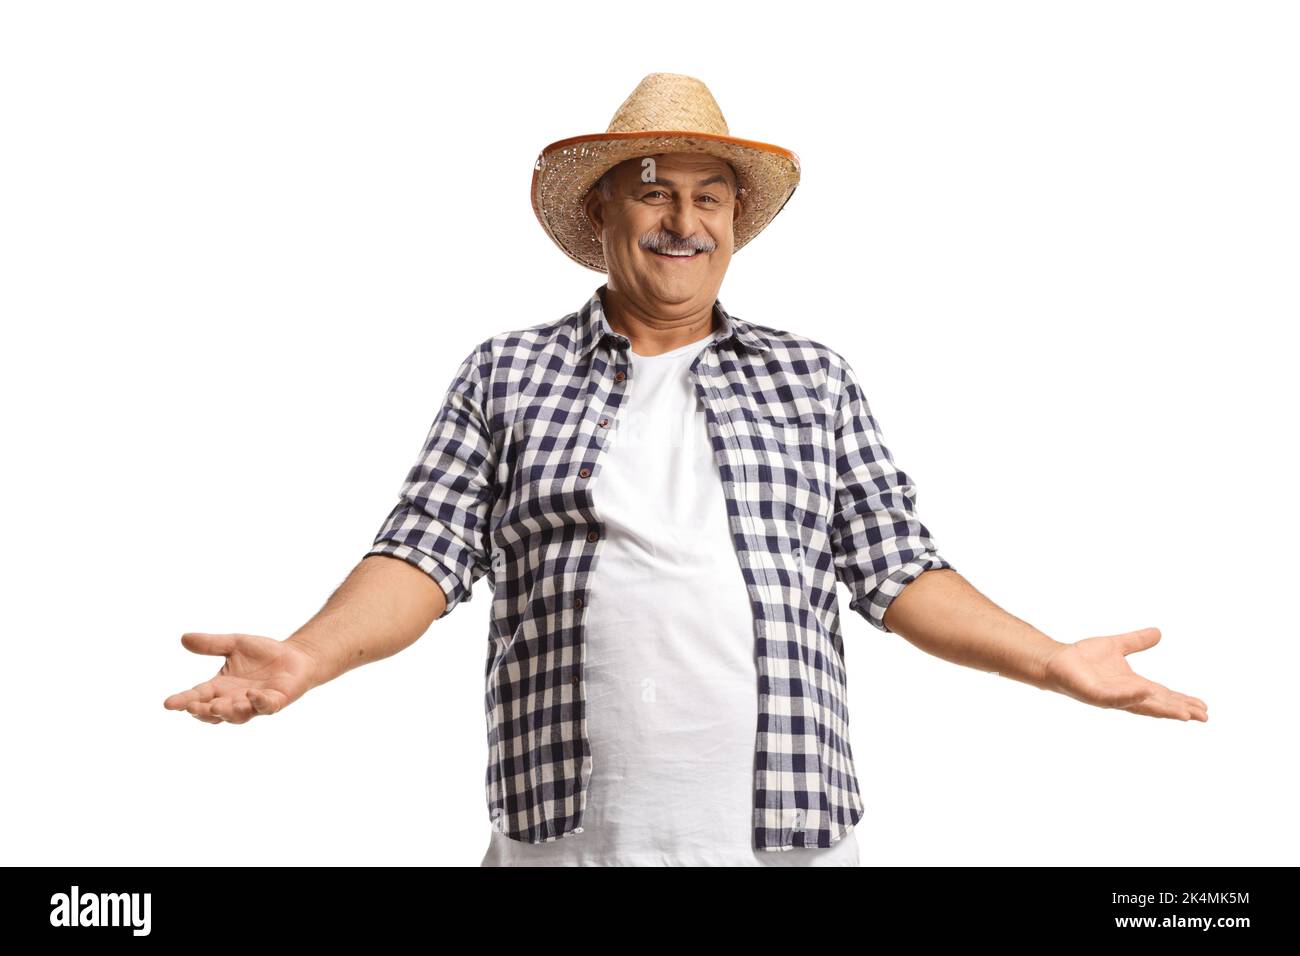 Happy mature farmer with a straw hat gesturing with hands isolated on white background Stock Photo